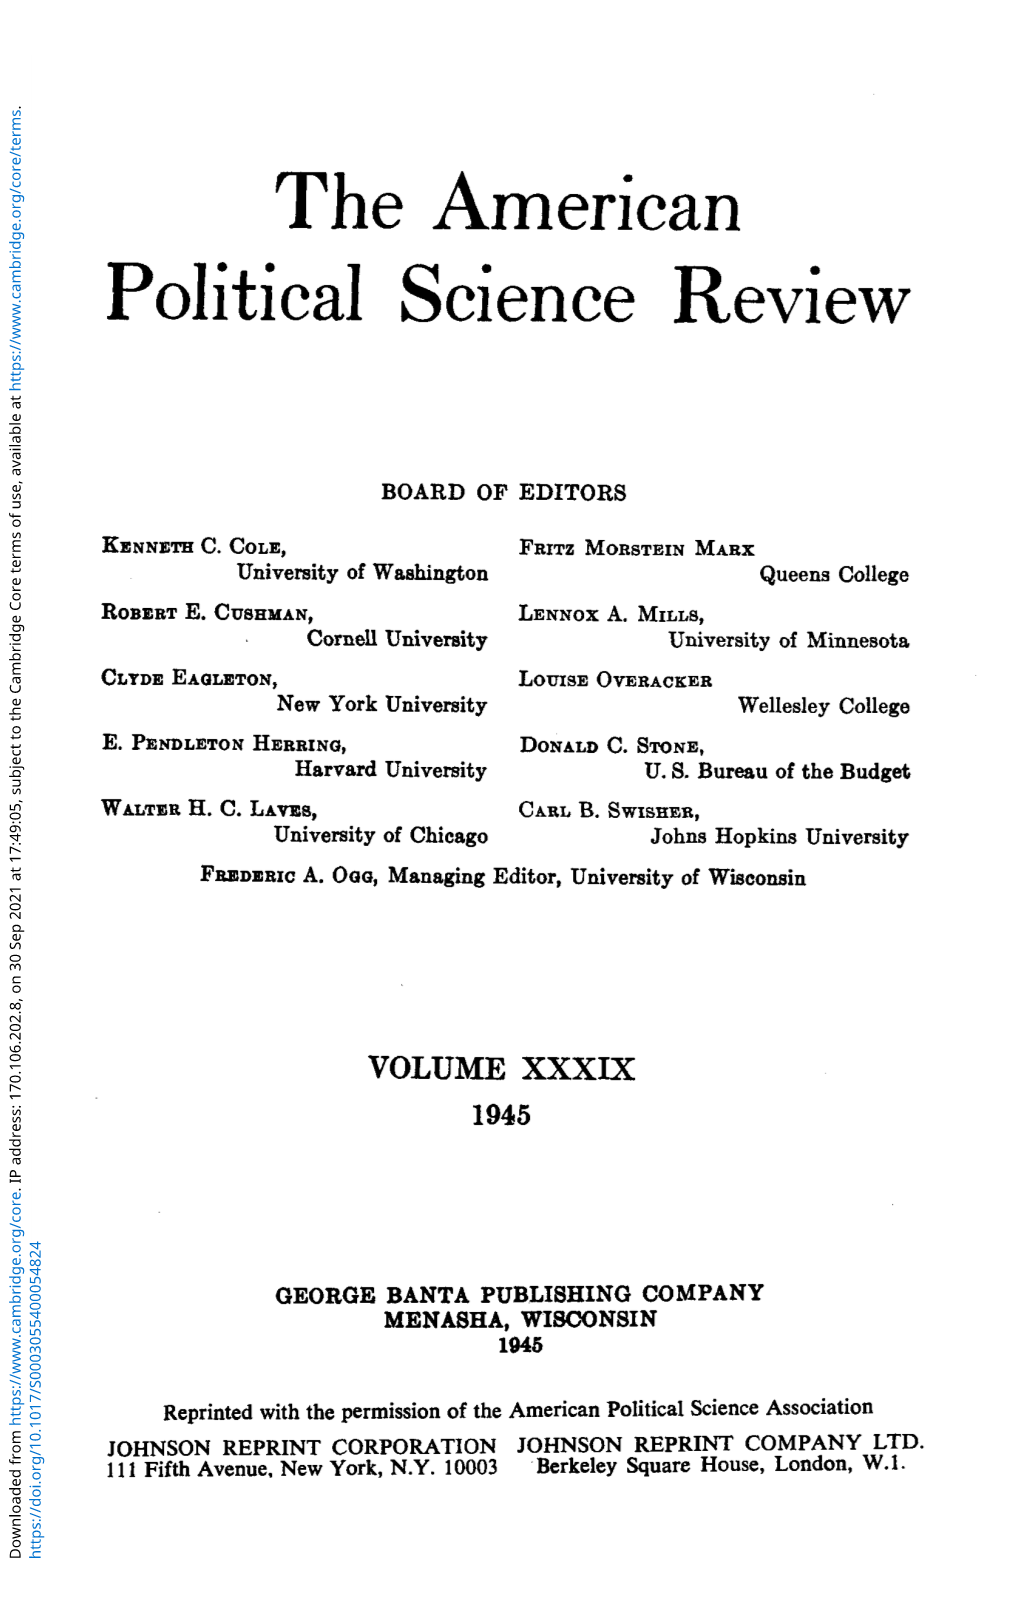 The American Political Science Review